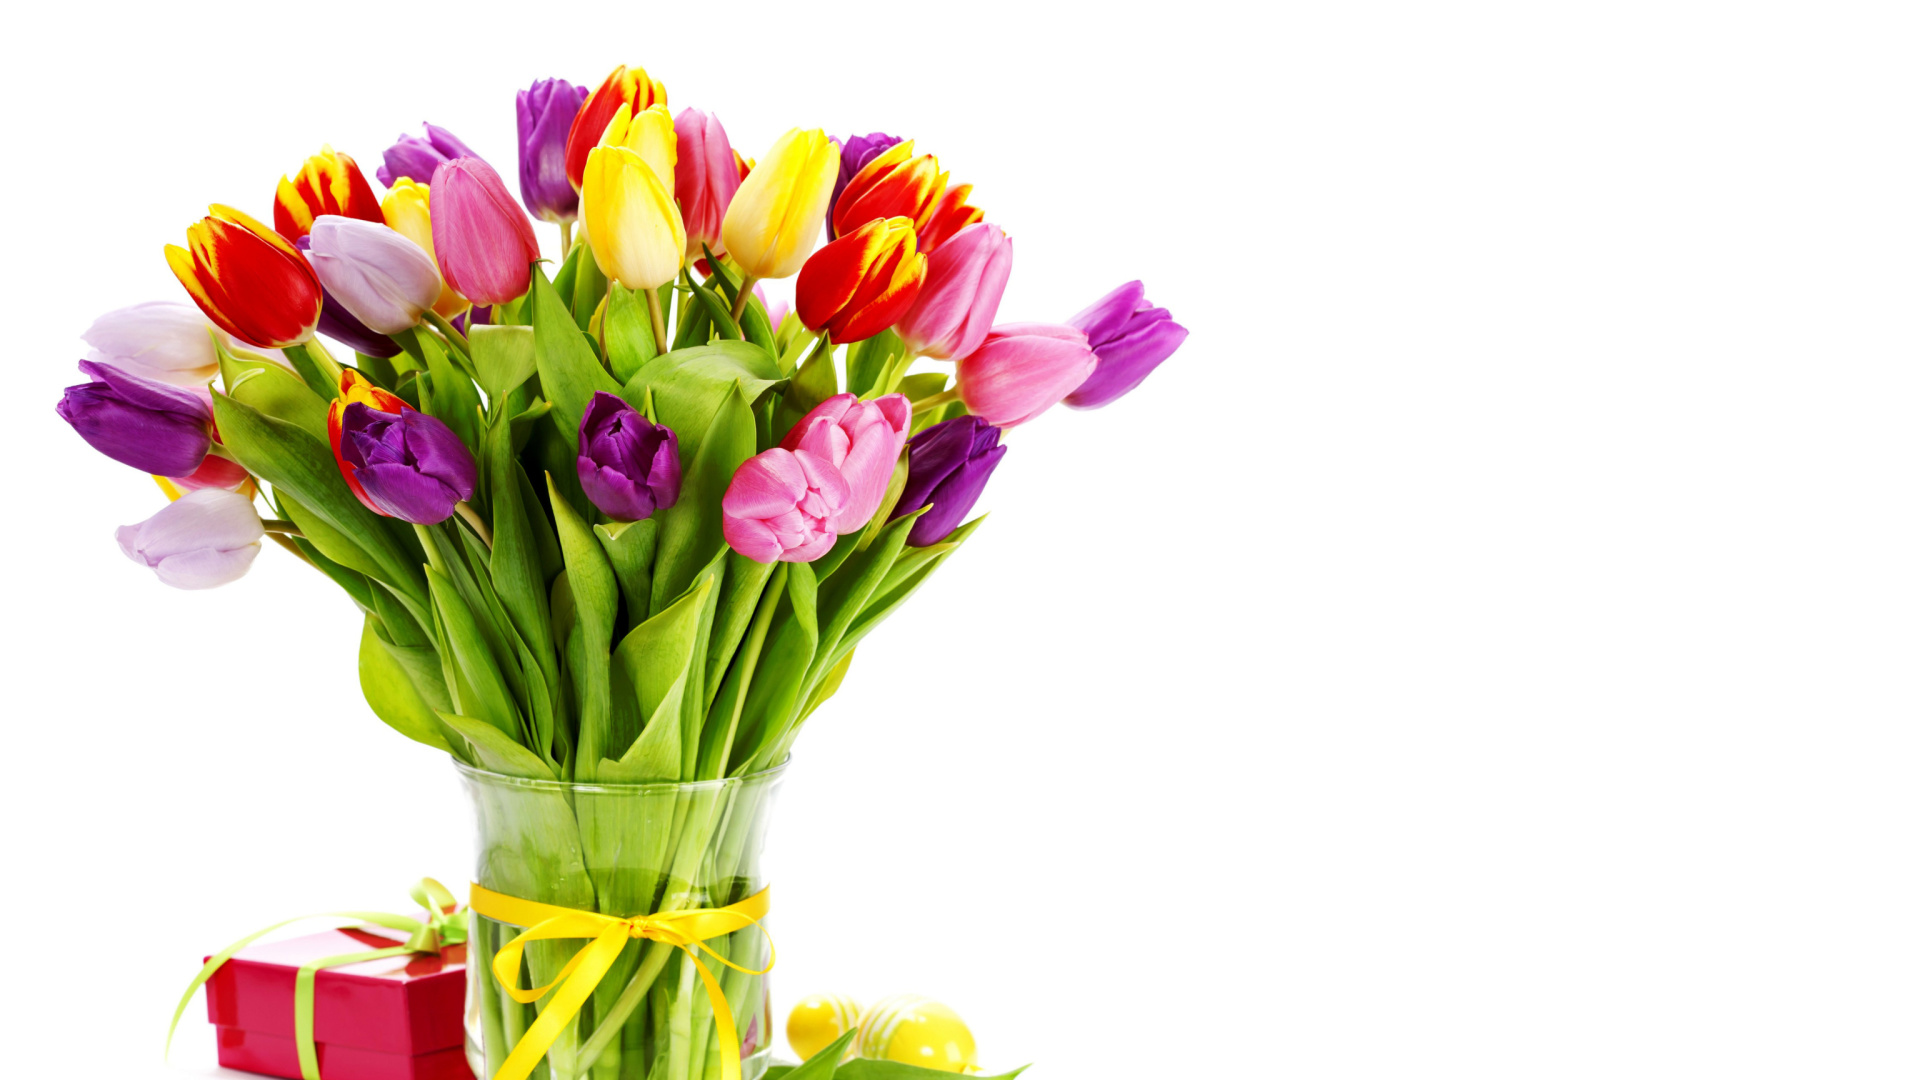 Tulips Bouquet and Gift wallpaper 1920x1080